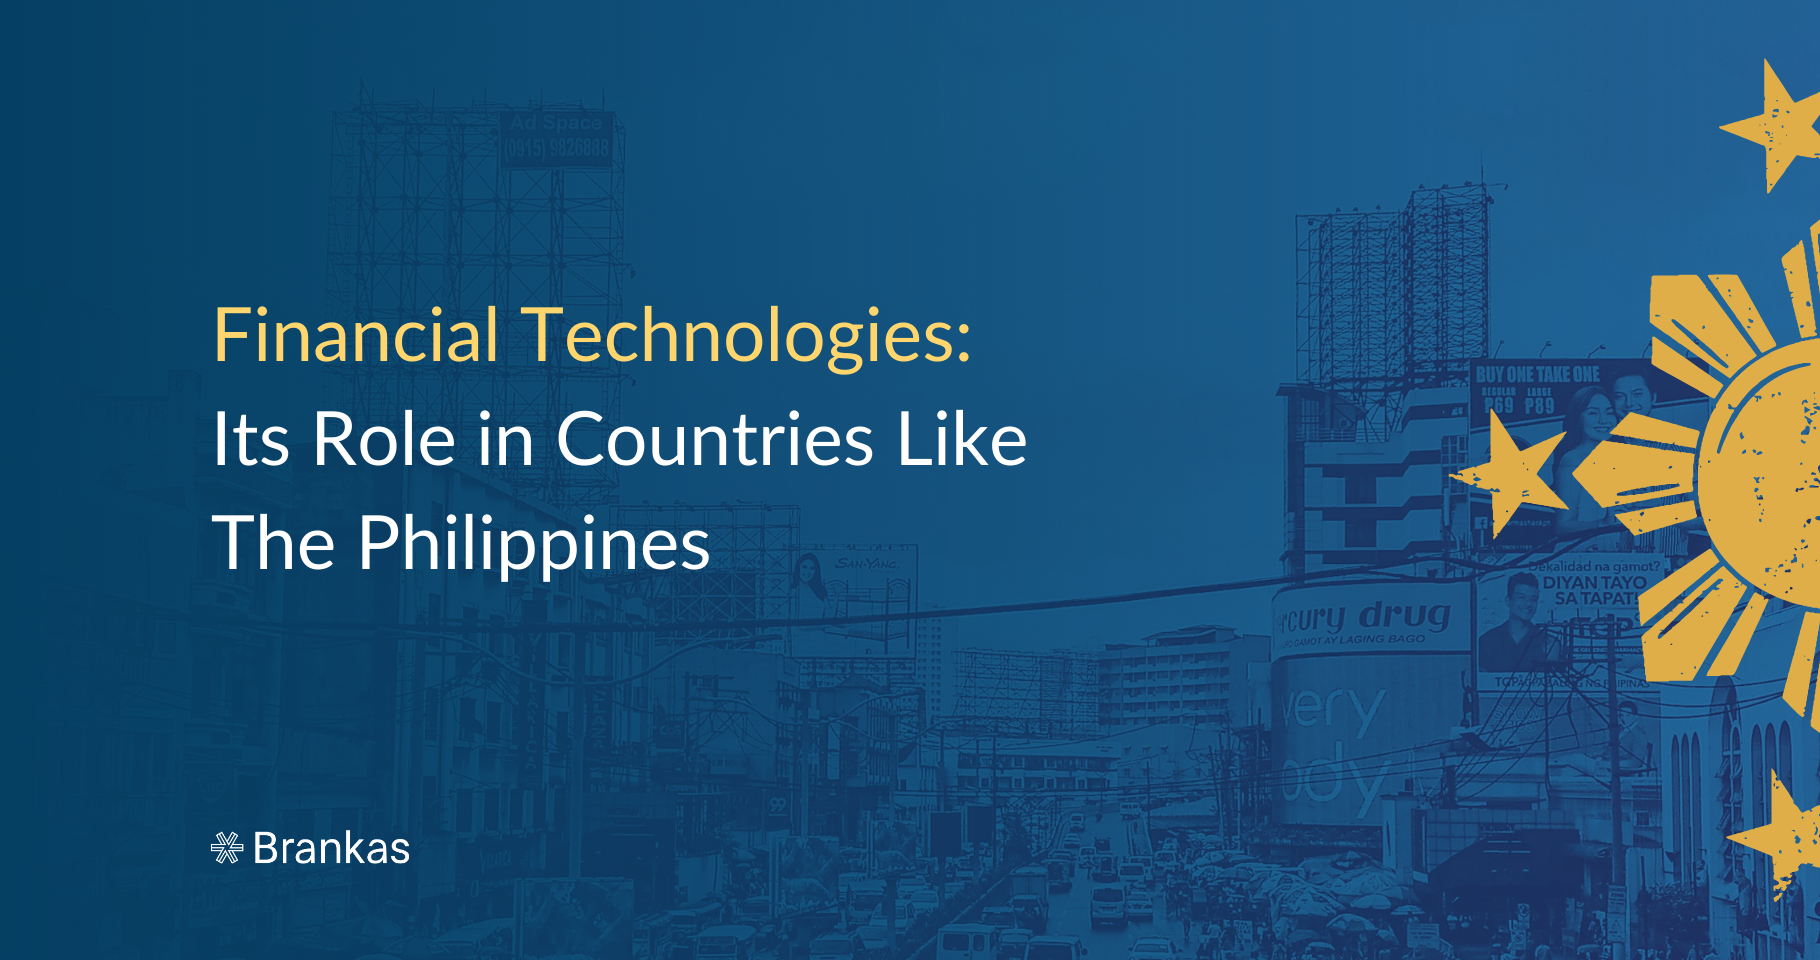 Financial Technologies: Its Role in Countries like the Philippines